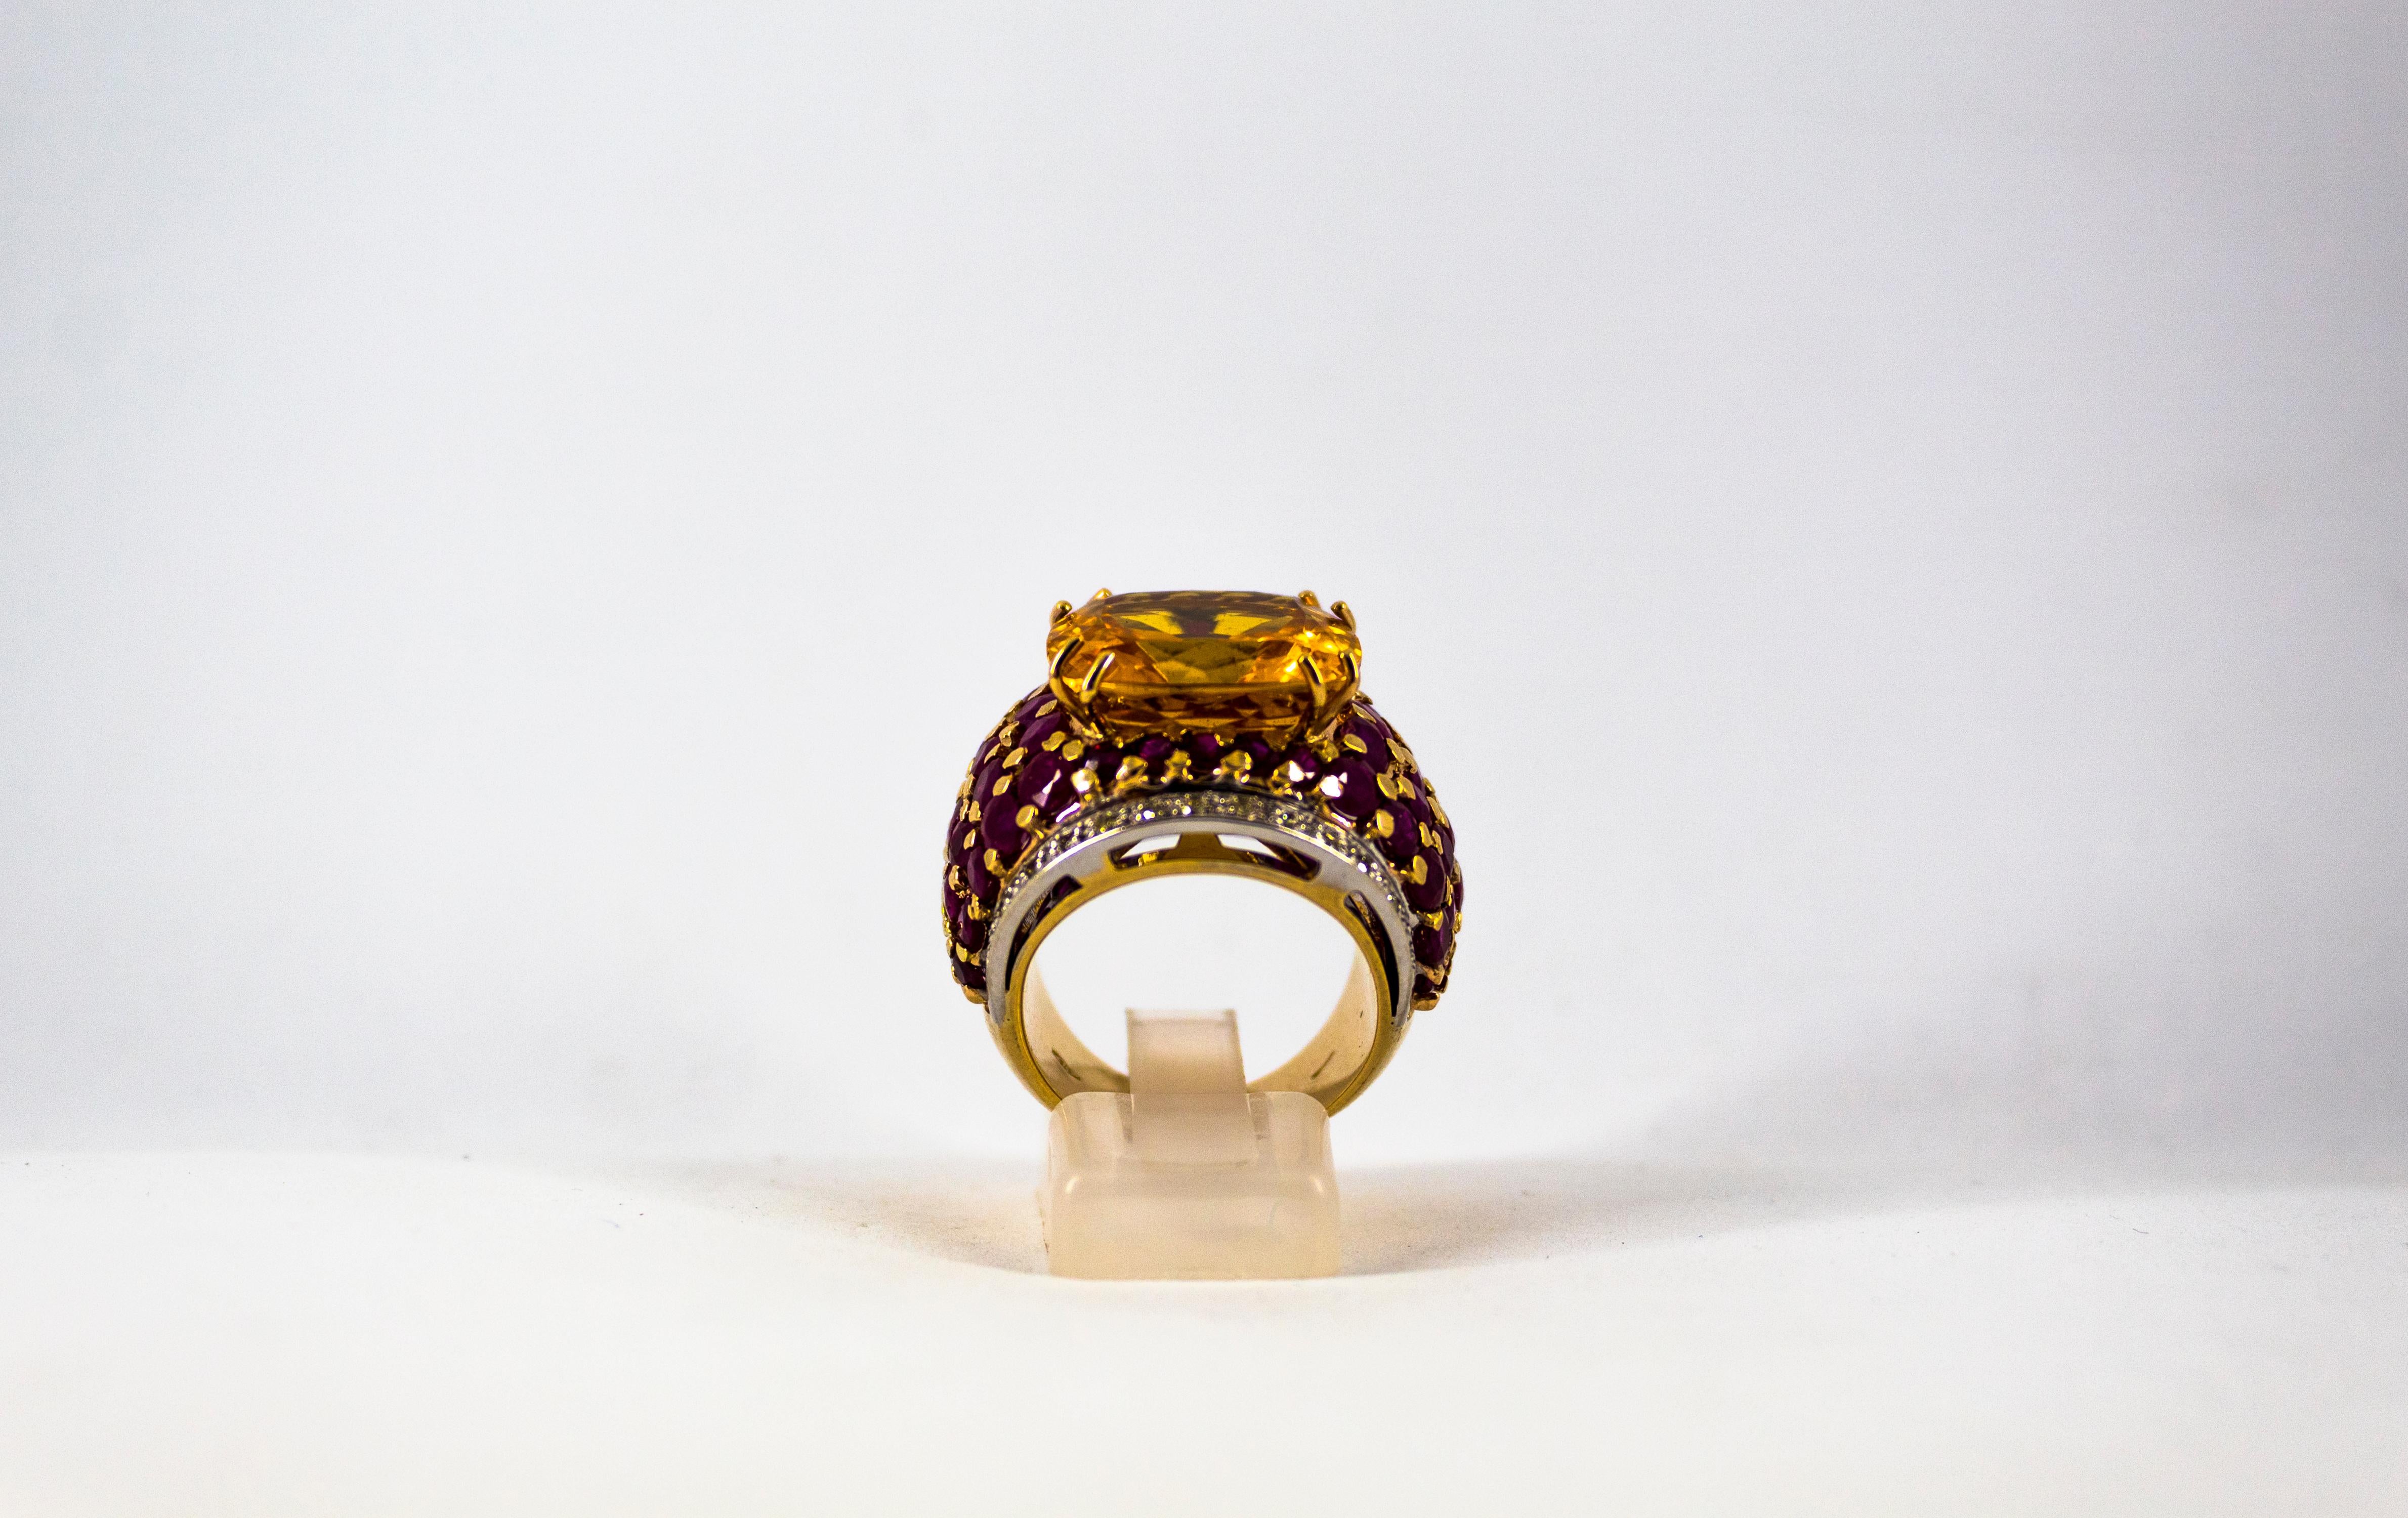 This Ring is made of 9K Yellow Gold.
This Ring has 0.30 Carats of White Diamonds.
This Ring has 9.70 Carats of Rubies.
This Ring has also a 8.00 Carats Citrine.
This Ring is inspired by Renaissance Style.
Size ITA: 16 USA: 7 and 1/2
We're a workshop